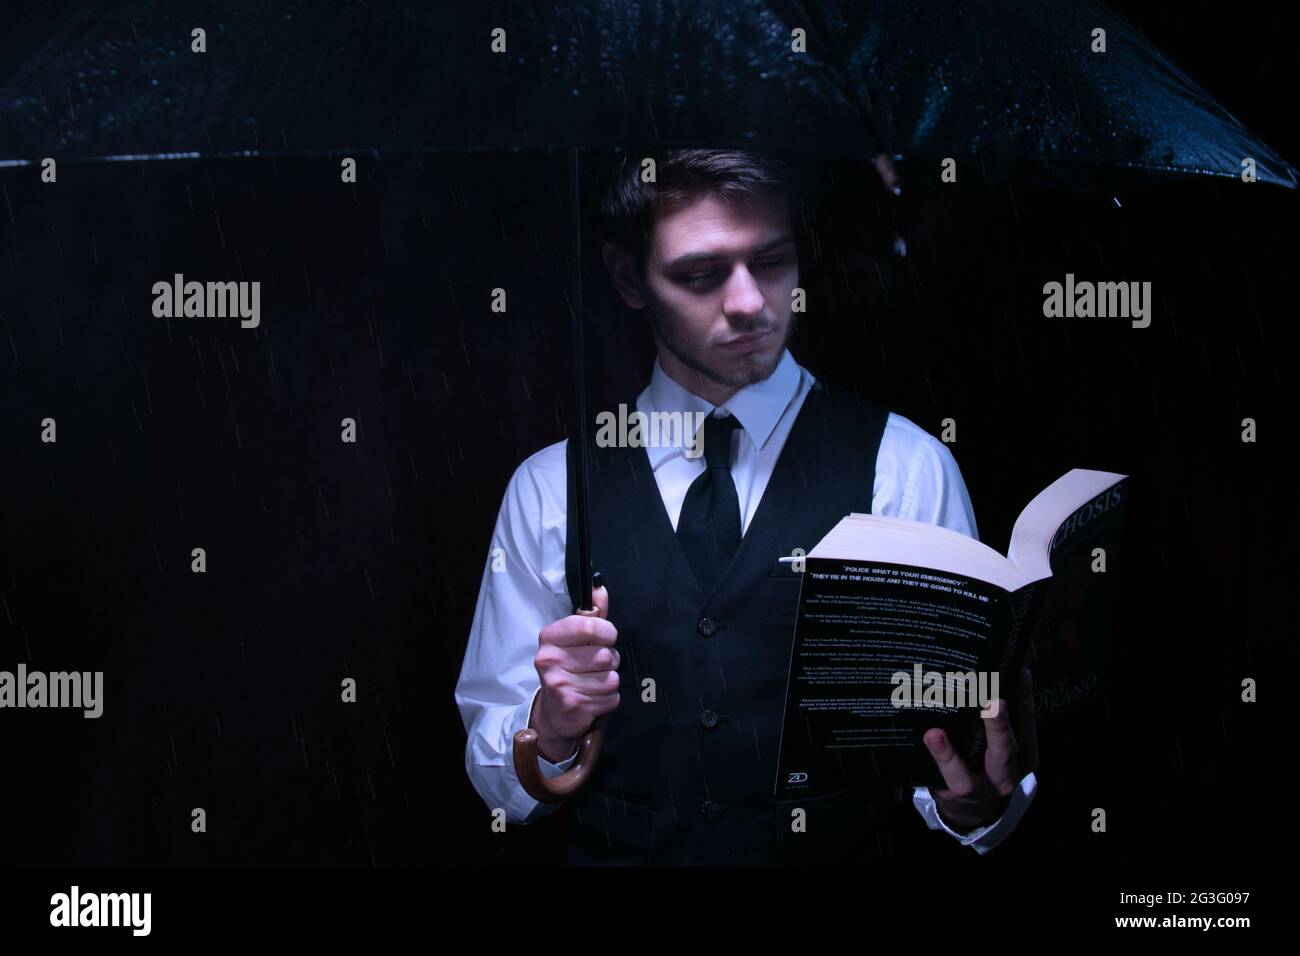 Man dressed in suit and tie holding unbrella and reading book Stock Photo